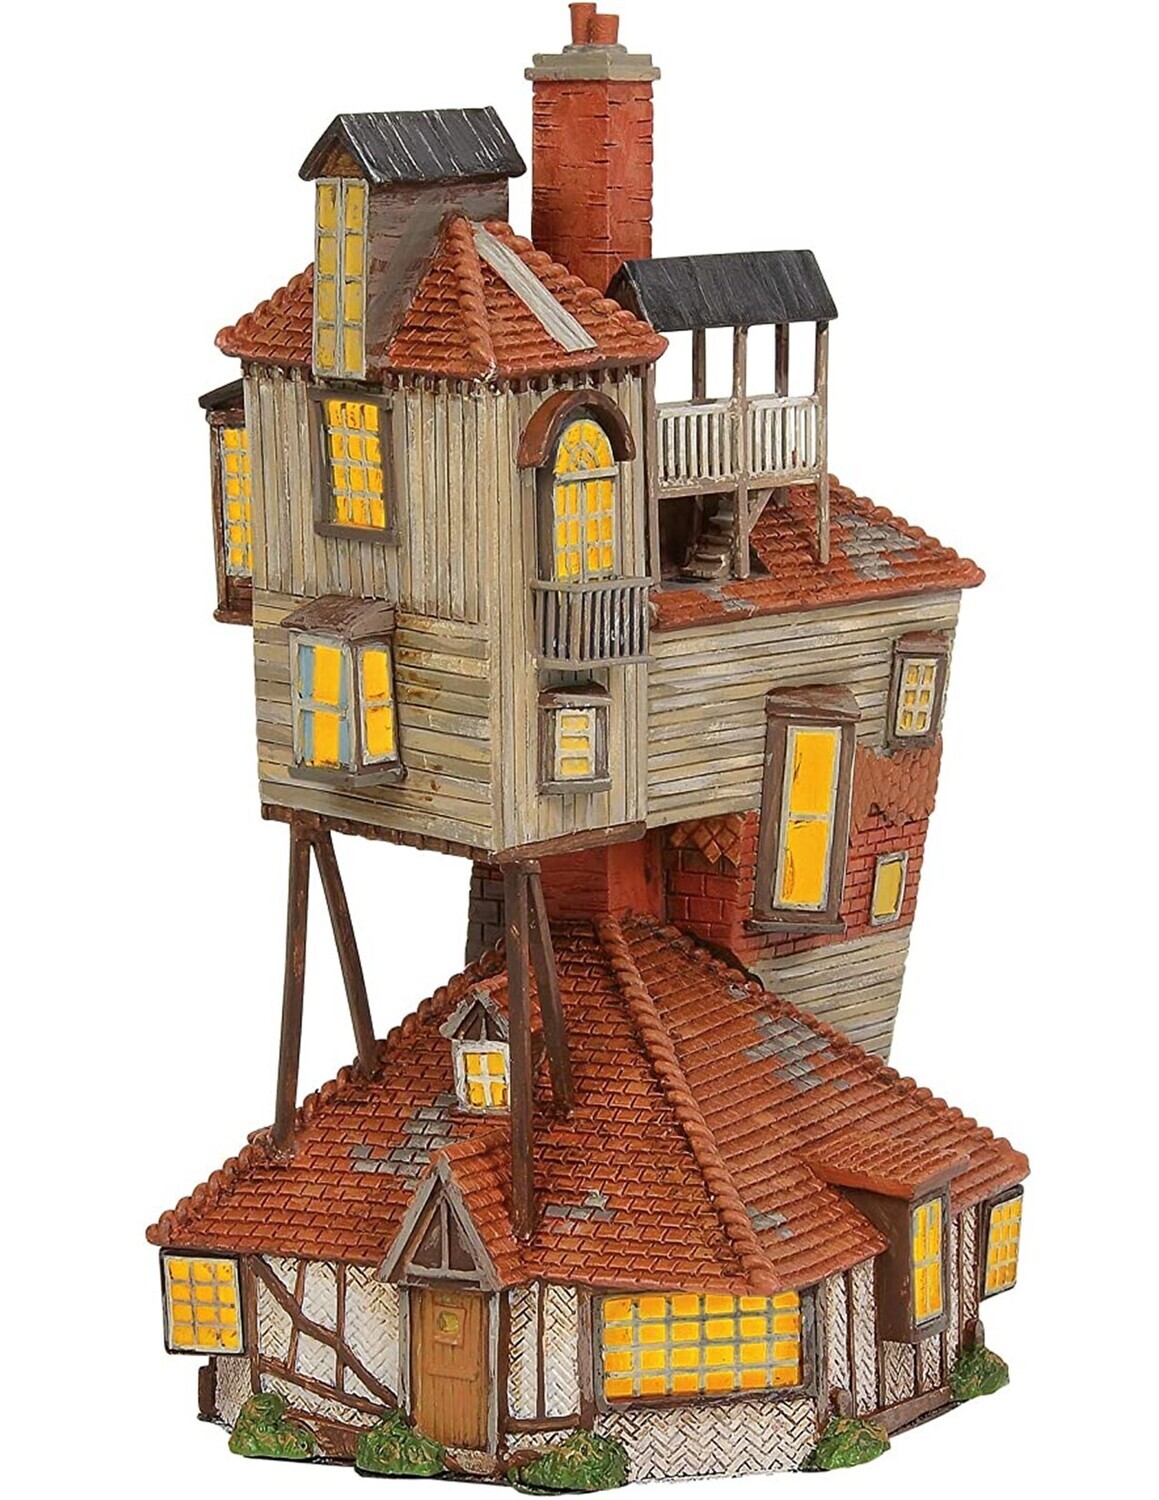 Department 56 Harry Potter Village "The Burrow" Lighted Building (6003328)